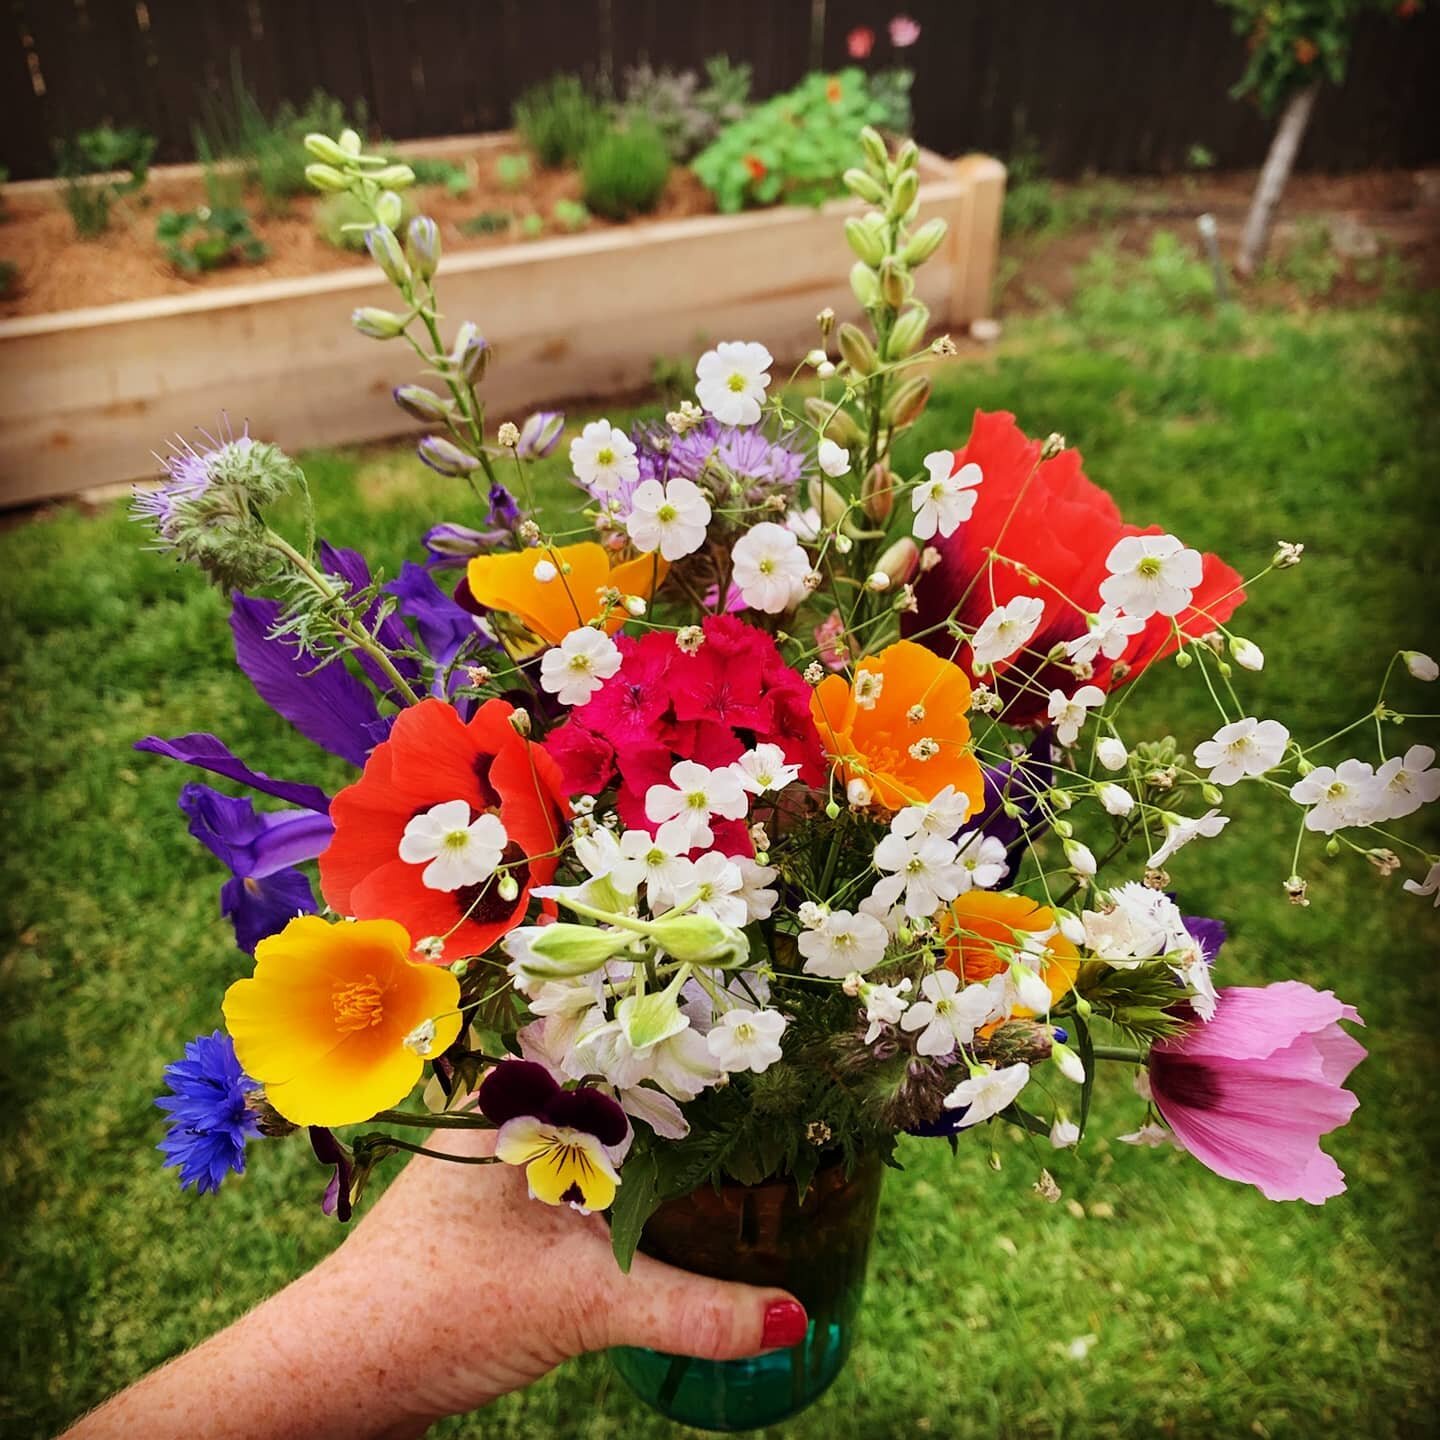 What's more fun than growing your own flowers? Watching your clients grow theirs!! I did the retrofit irrigation for raised beds but @mollymollusk did all the rest 💪🏼 #waterwhysirrigation #waterwhys #dripirrigation #cutflowers